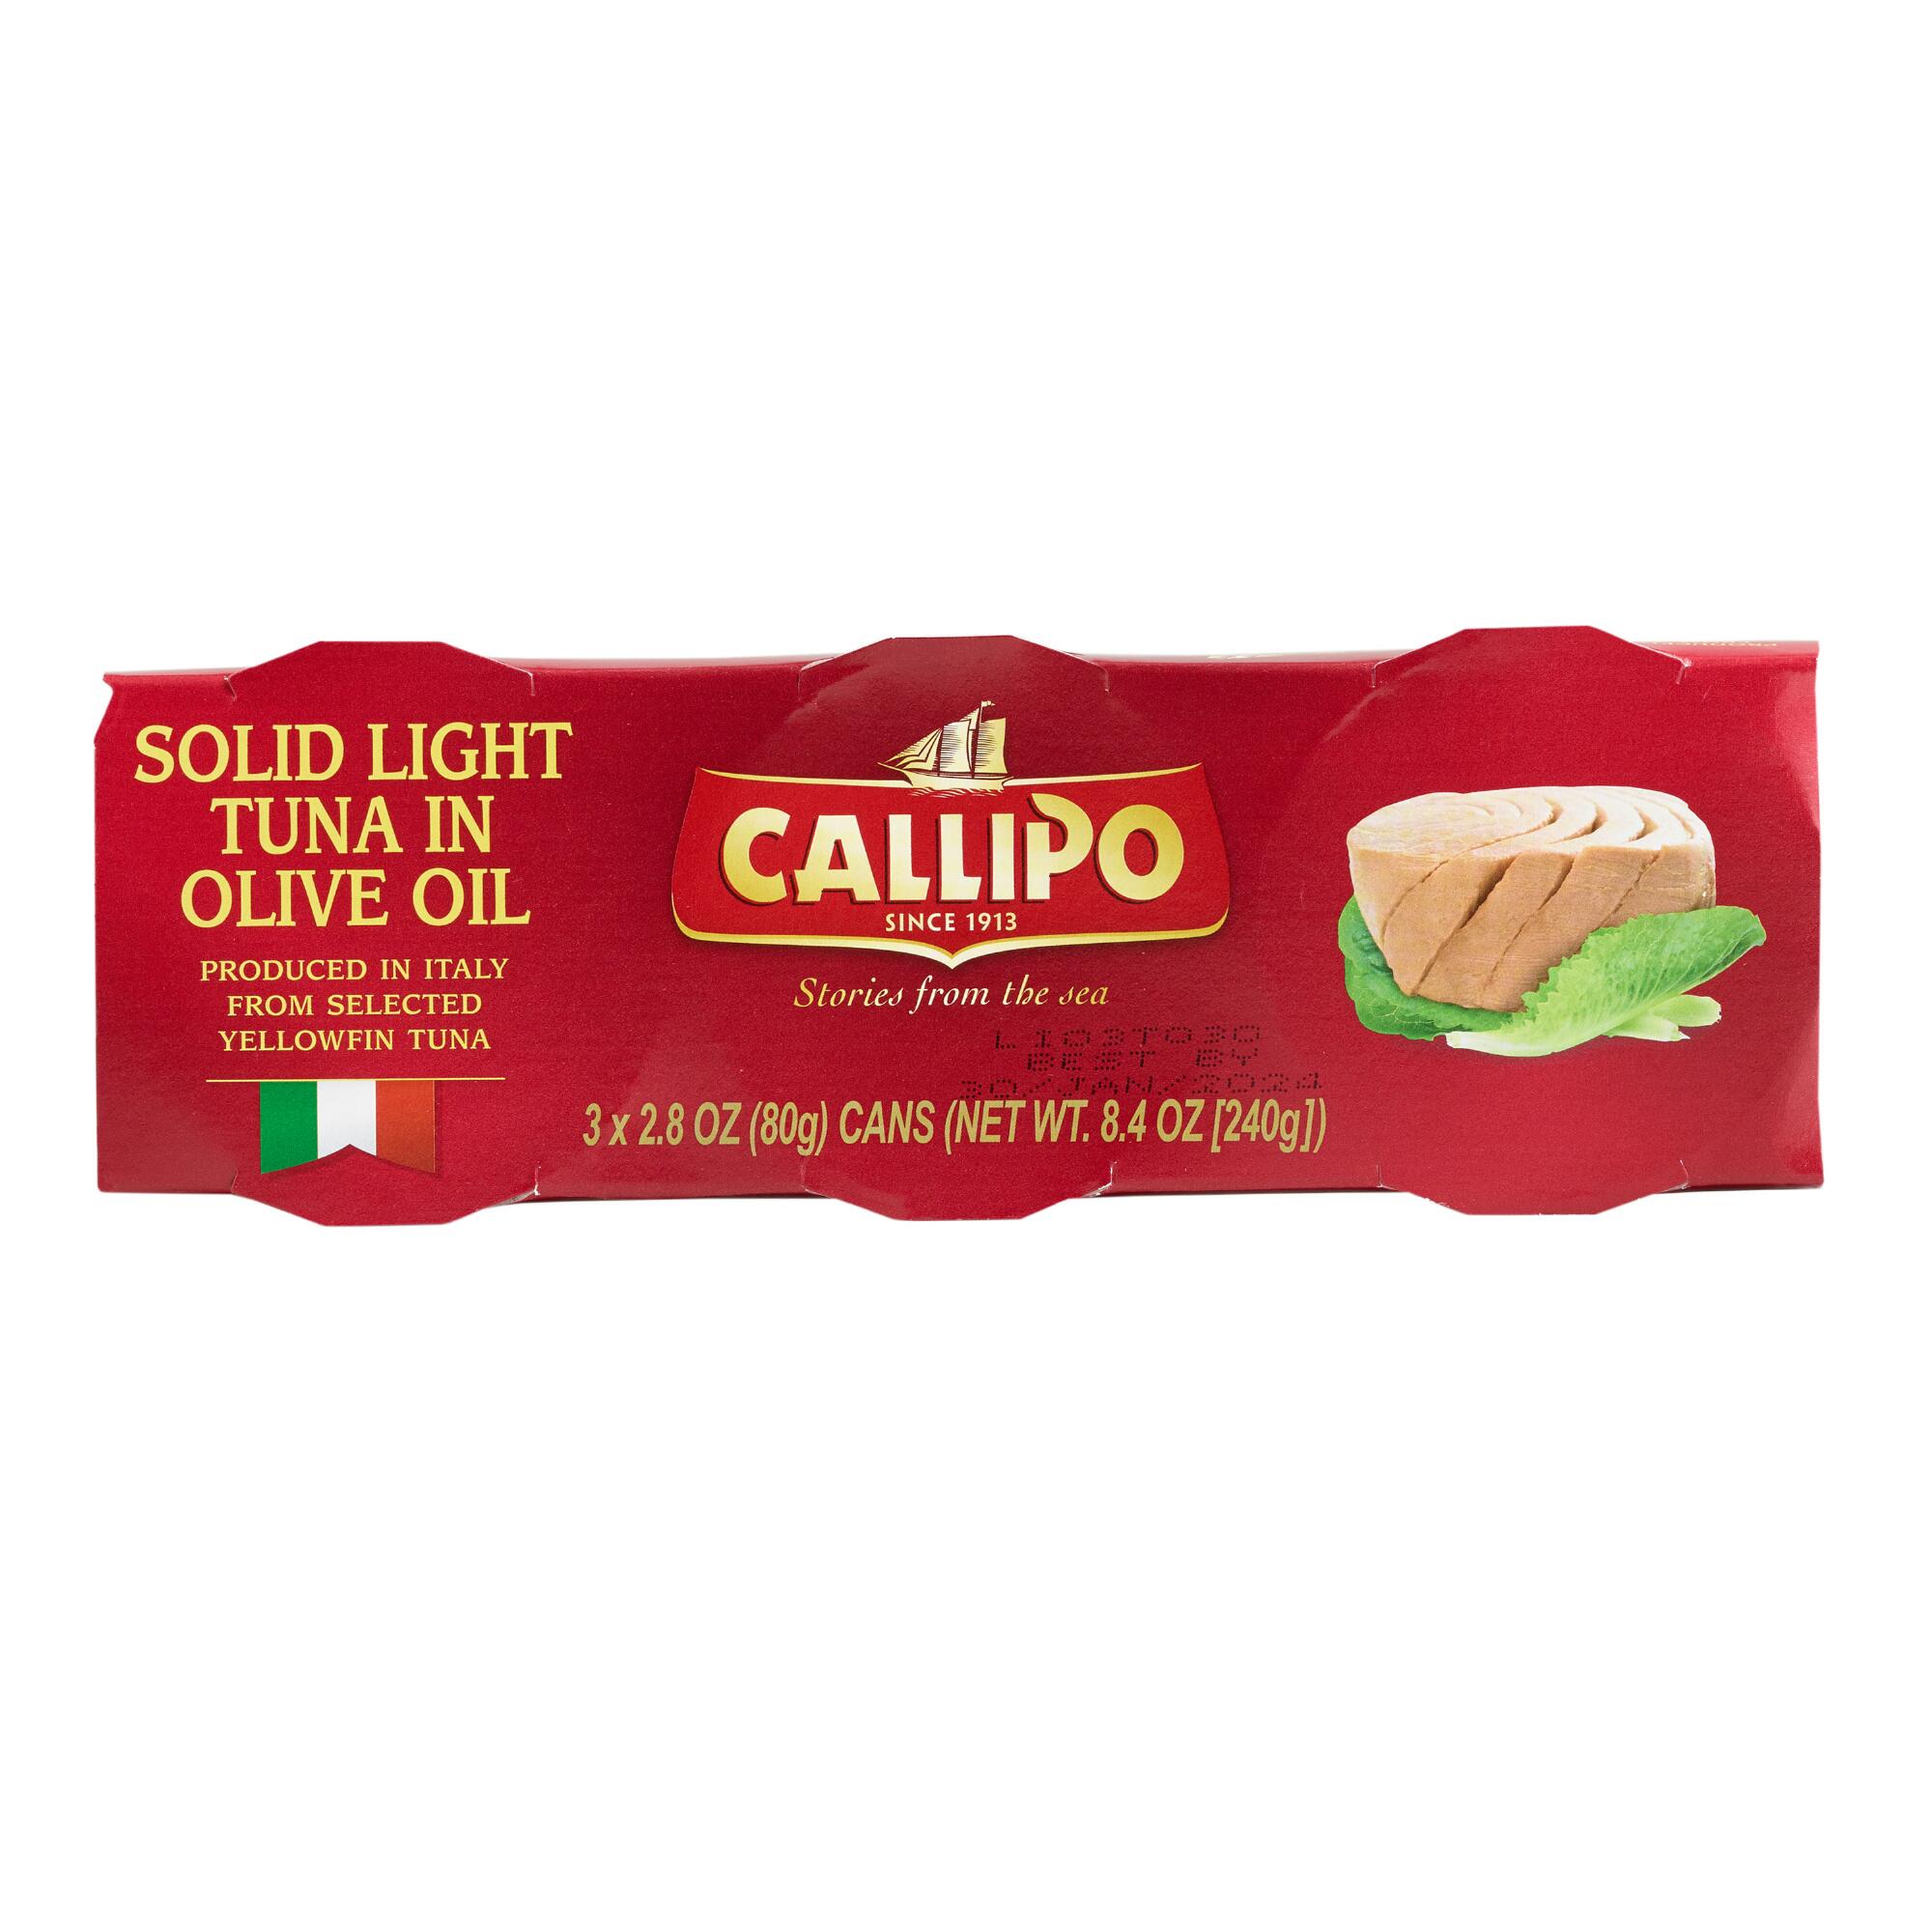 Callipo Solid Light Tuna in Olive Oil 3 Pack by World Market